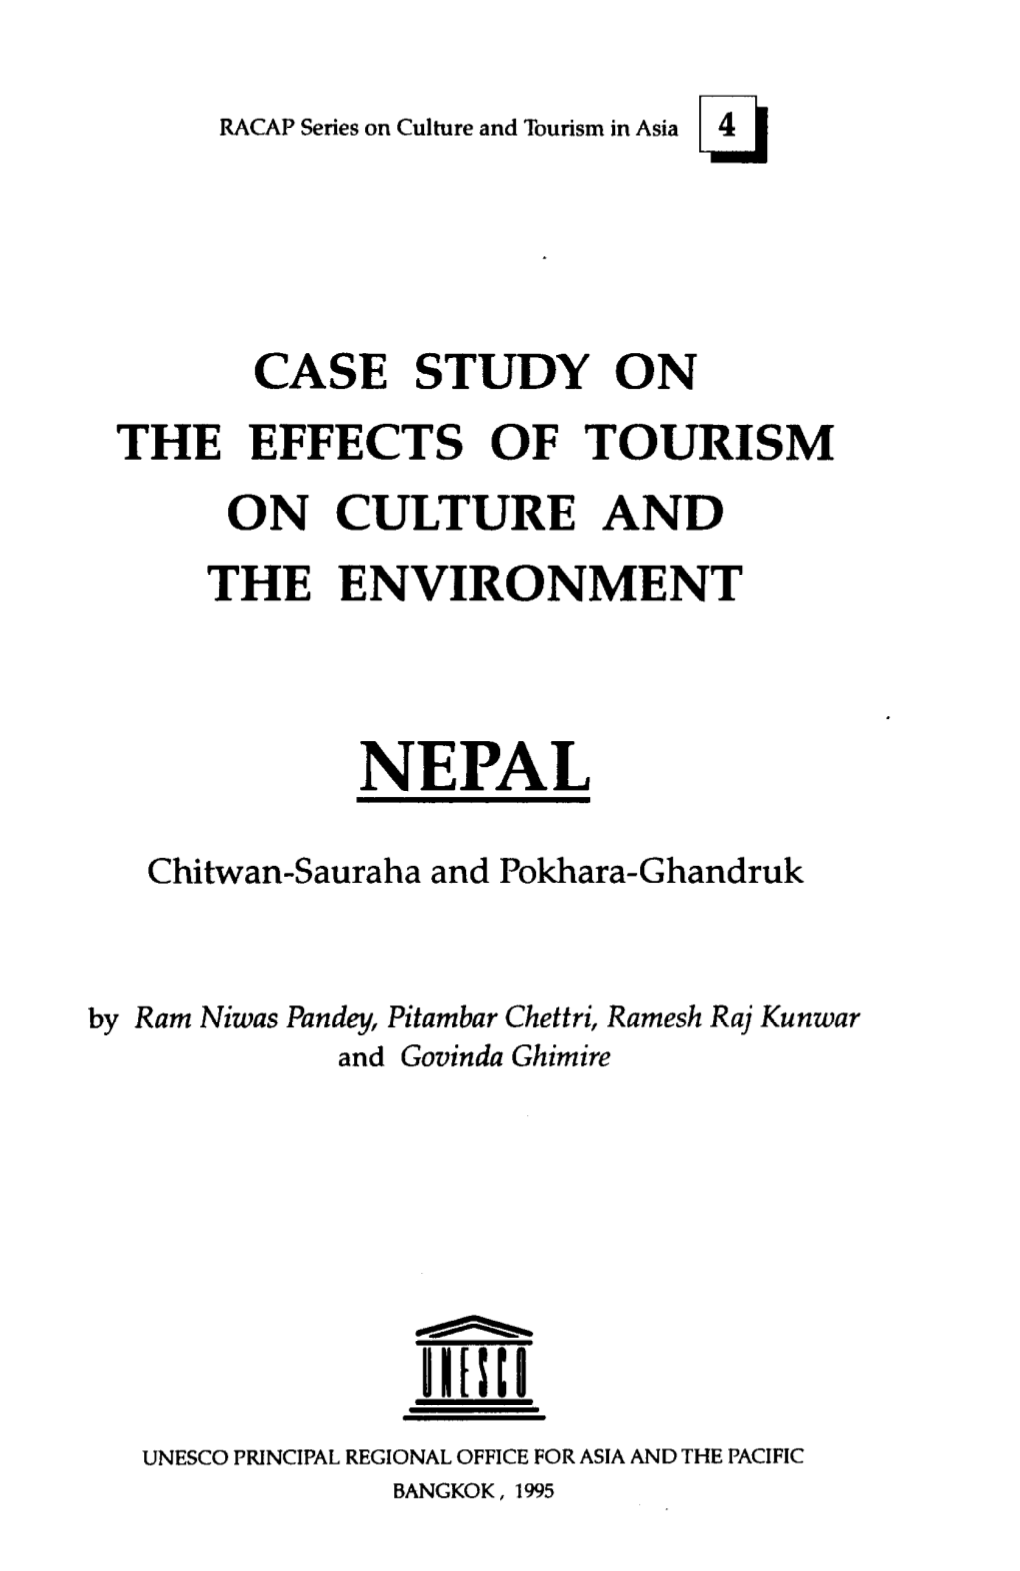 Case Study on the Effects of Tourism on Culture and the Environment